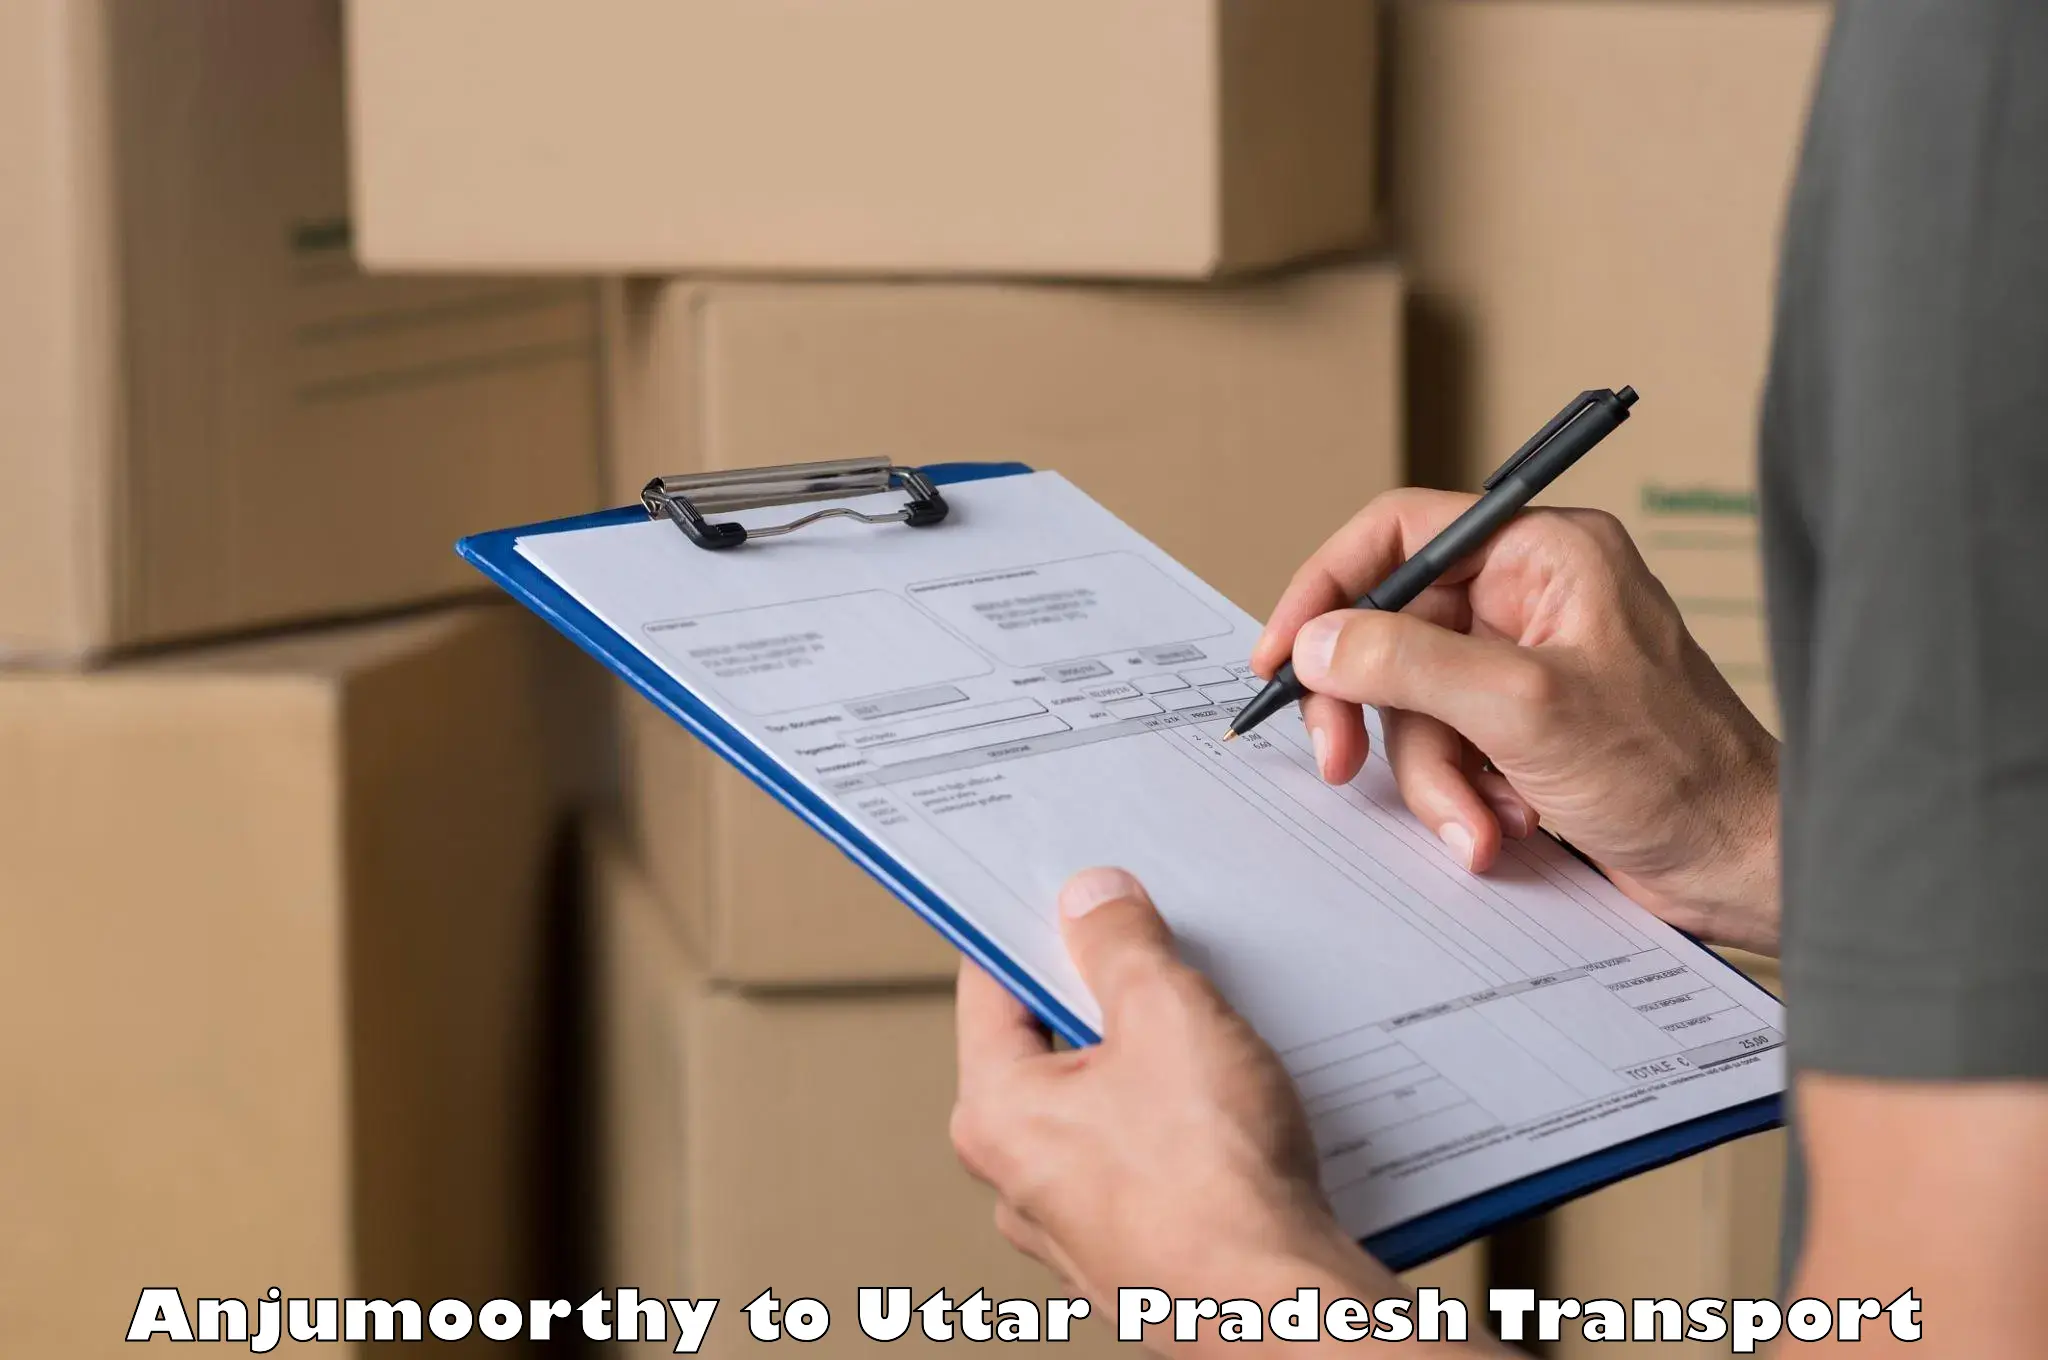 Two wheeler parcel service in Anjumoorthy to Ayodhya